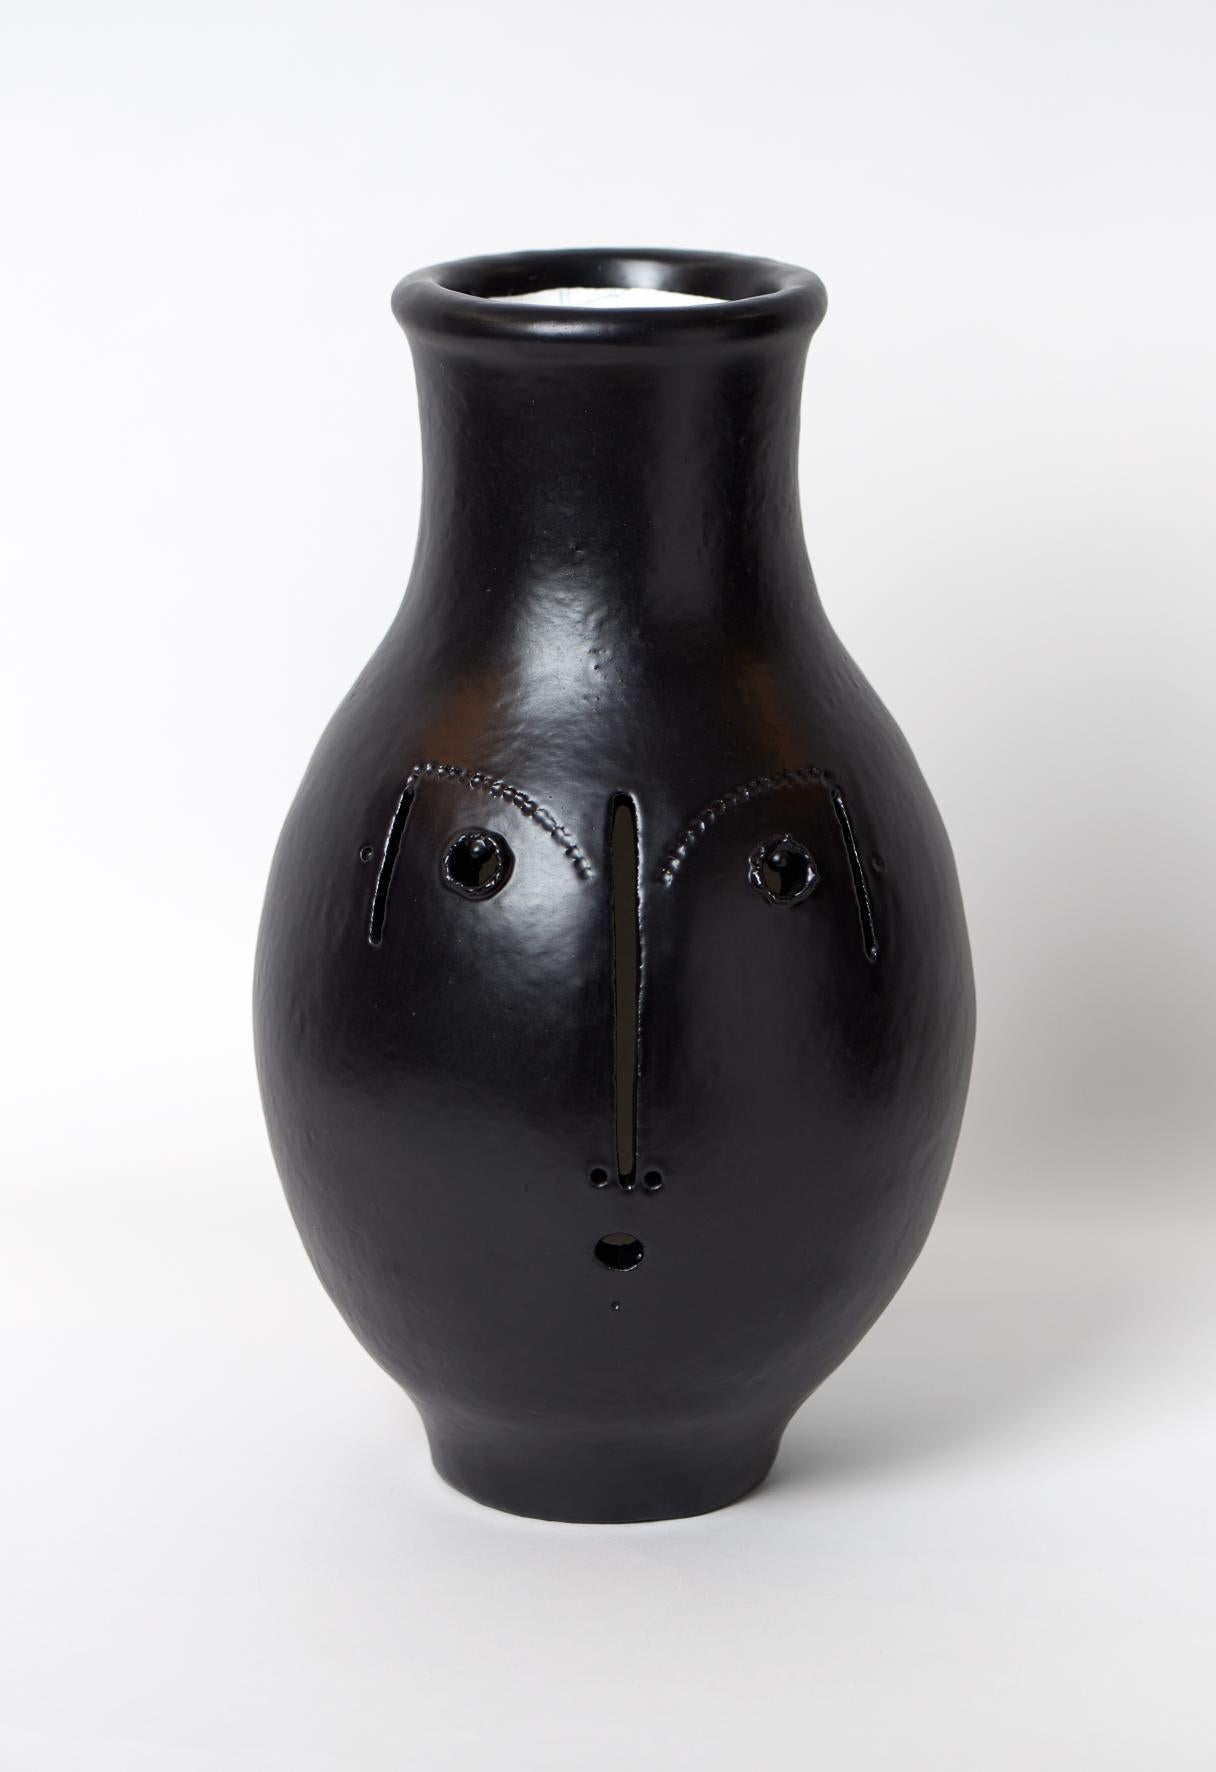 Large hand-sculpted ceramic decorative vase, stylized face with open lines, stoneware glazed in black outside and white enamel inside.

One of a kind handmade piece signed by the French ceramicists Dalo, 2018.

Information: This is a decorative vase